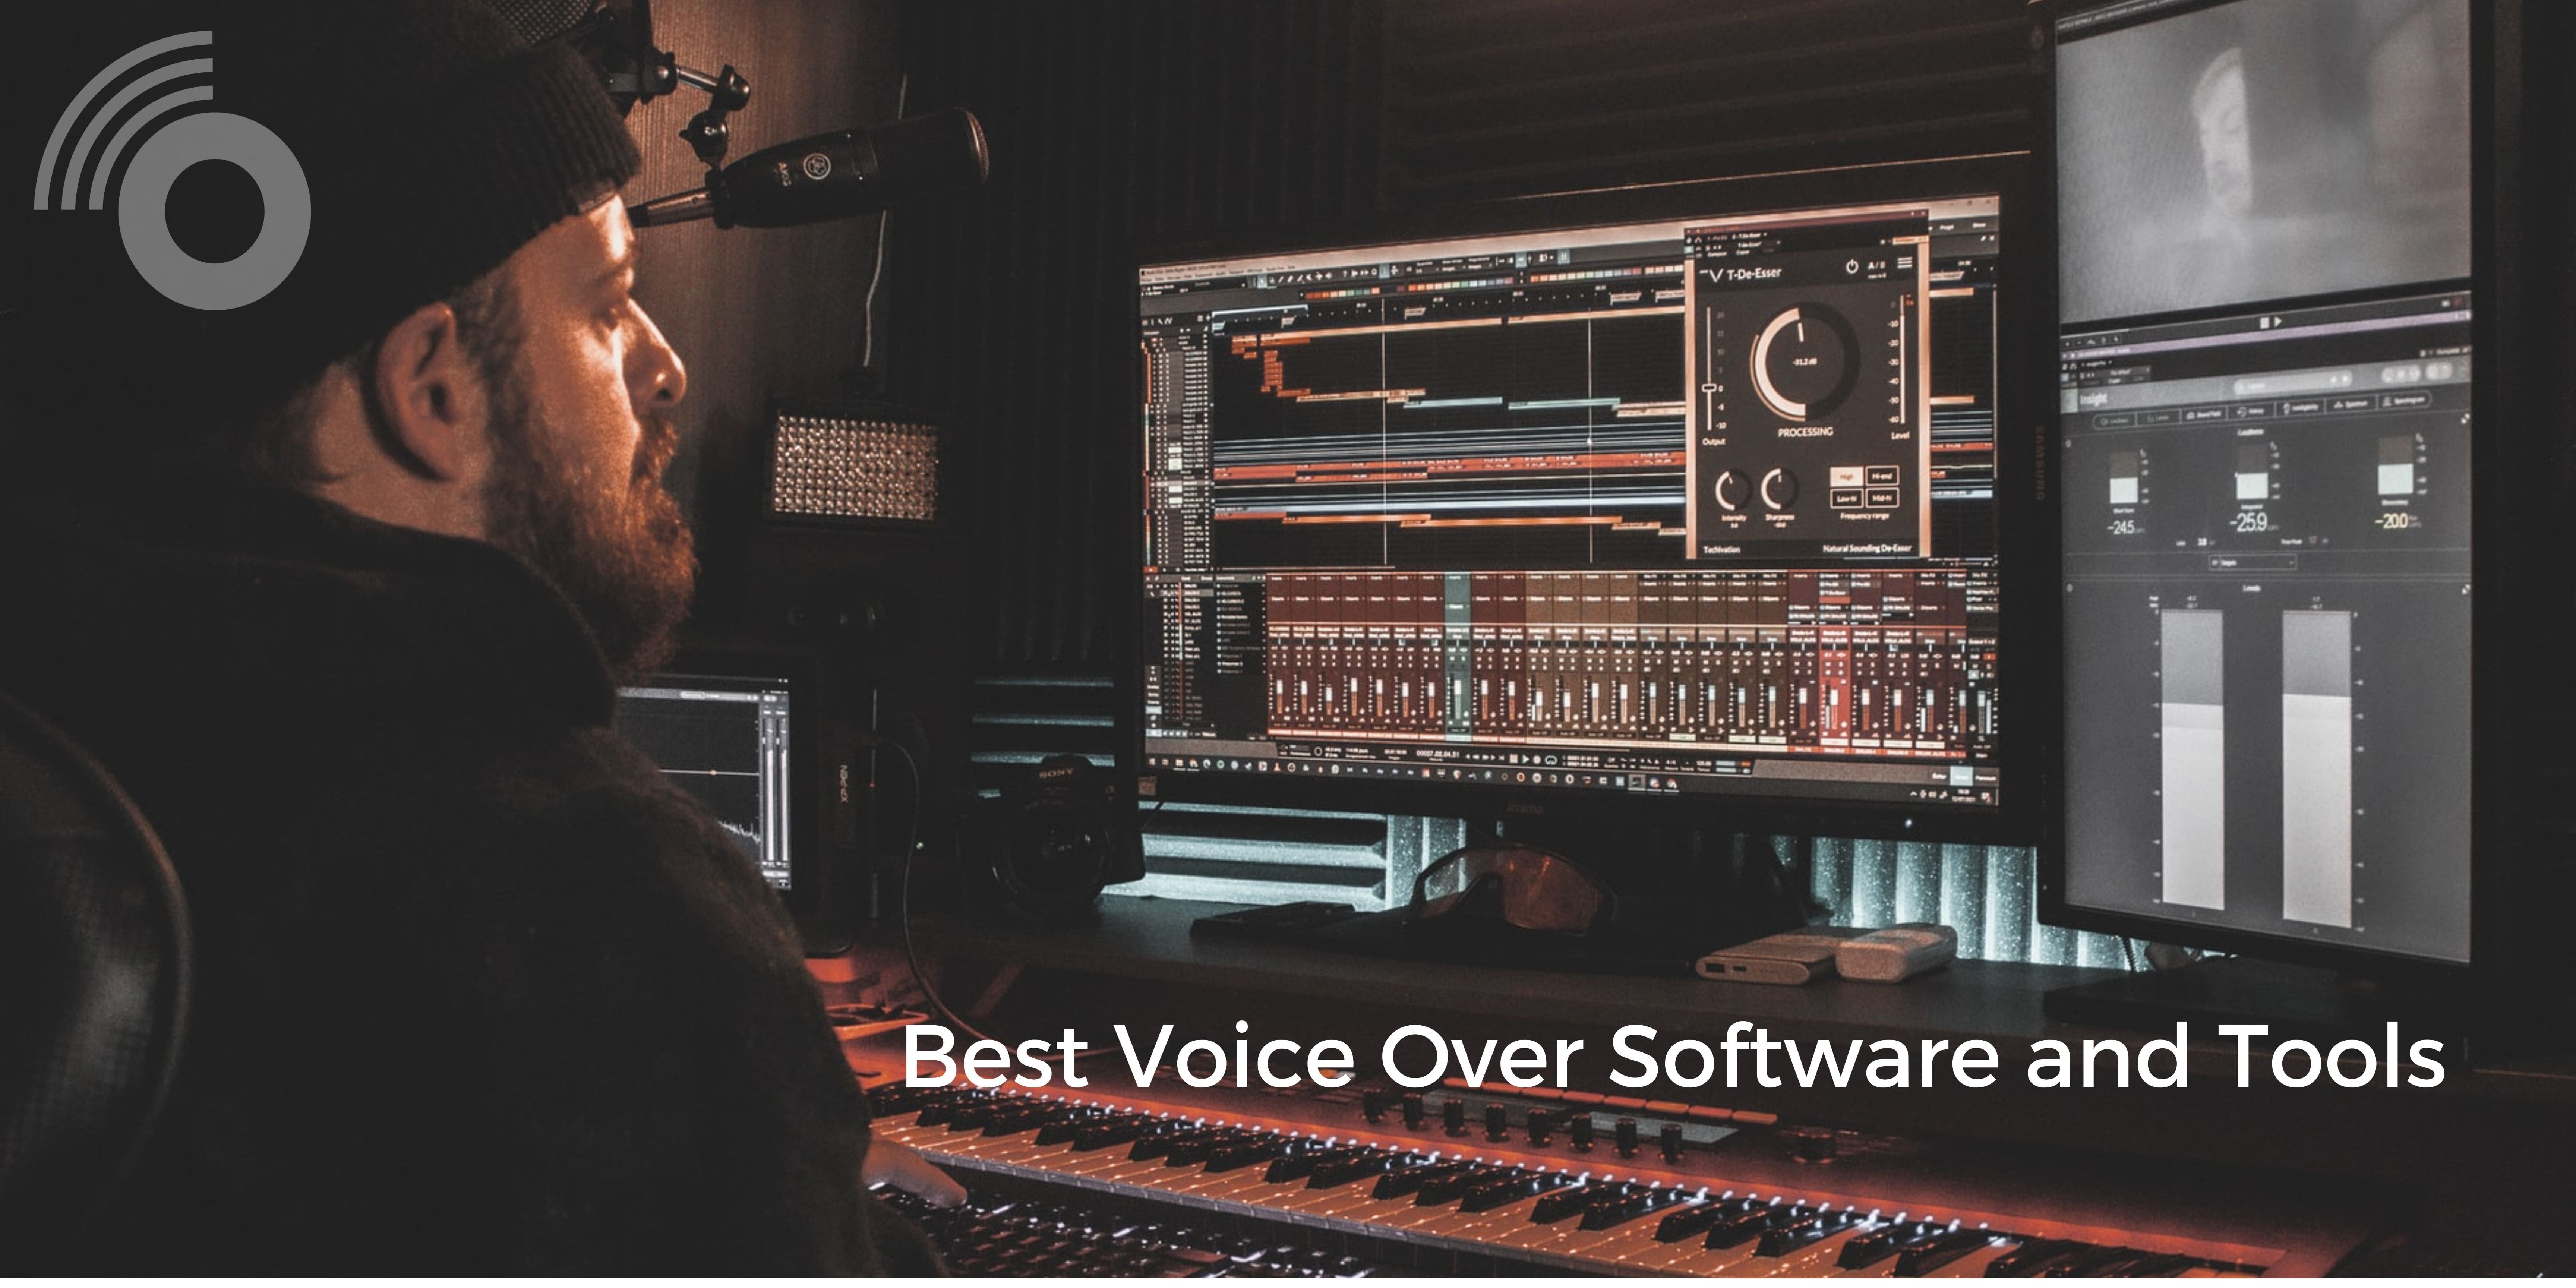 Best Voice Over Software and Tools